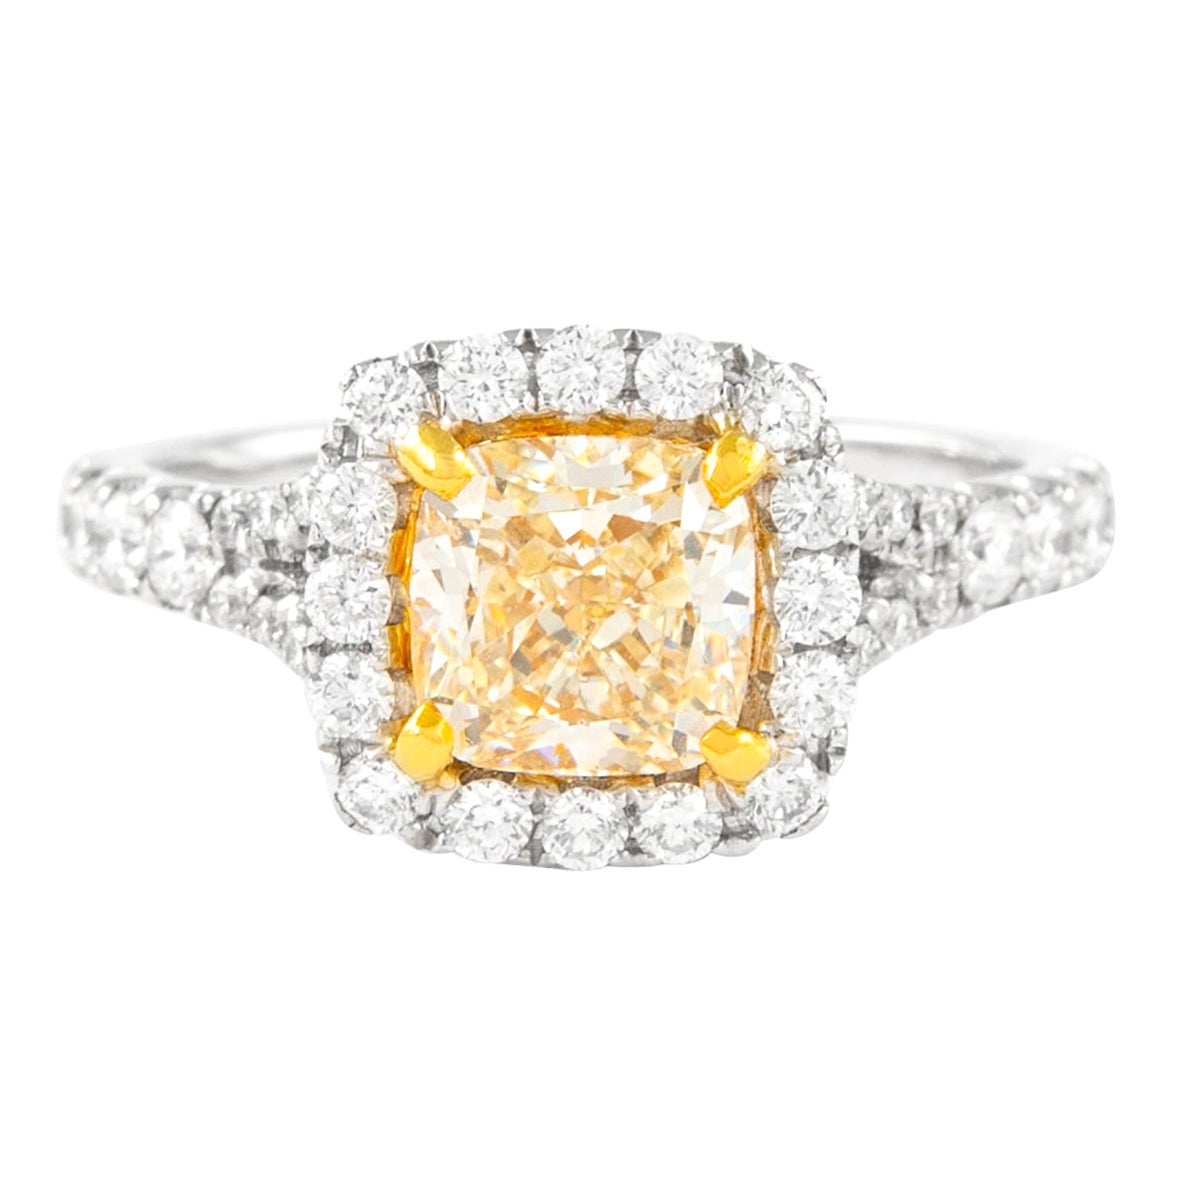 Alexander 2.16ctt Fancy Light Yellow Cushion Diamond with Halo Ring 18k Two Tone For Sale